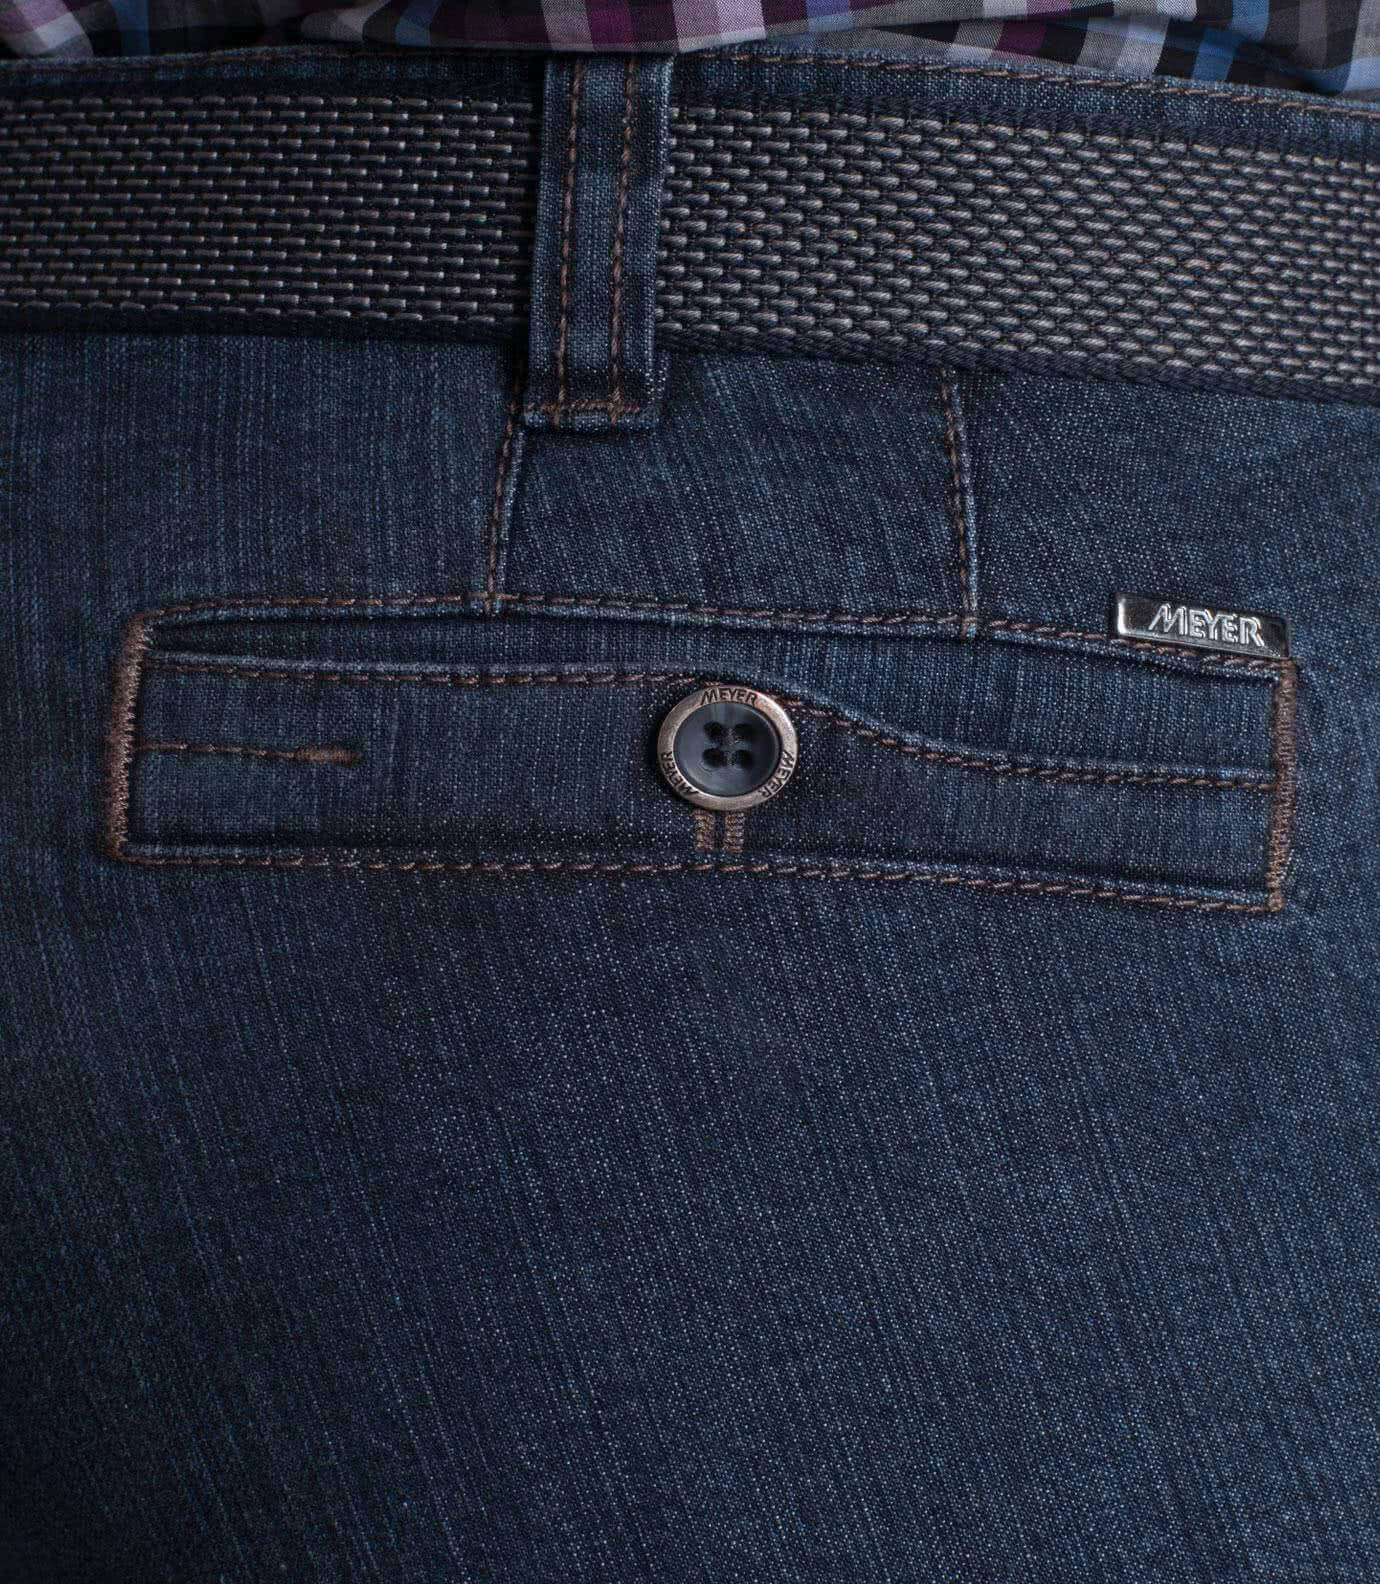 Meyer Diego Denim Trouser: The Perfect Blend of Quality, Comfort and Sustainability